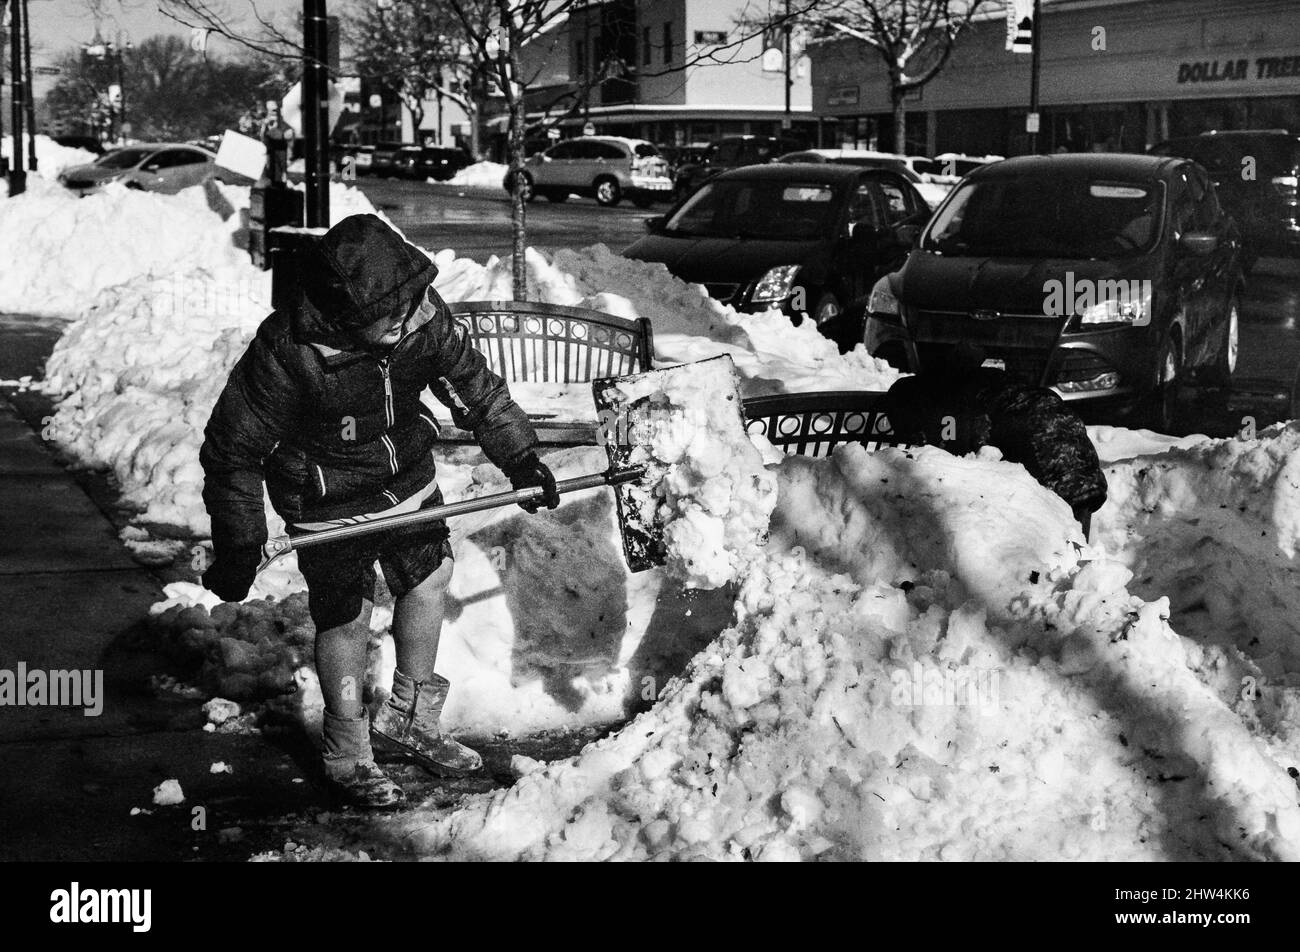 A young man shovels snow off sidewalk after a storm. Stock Photo